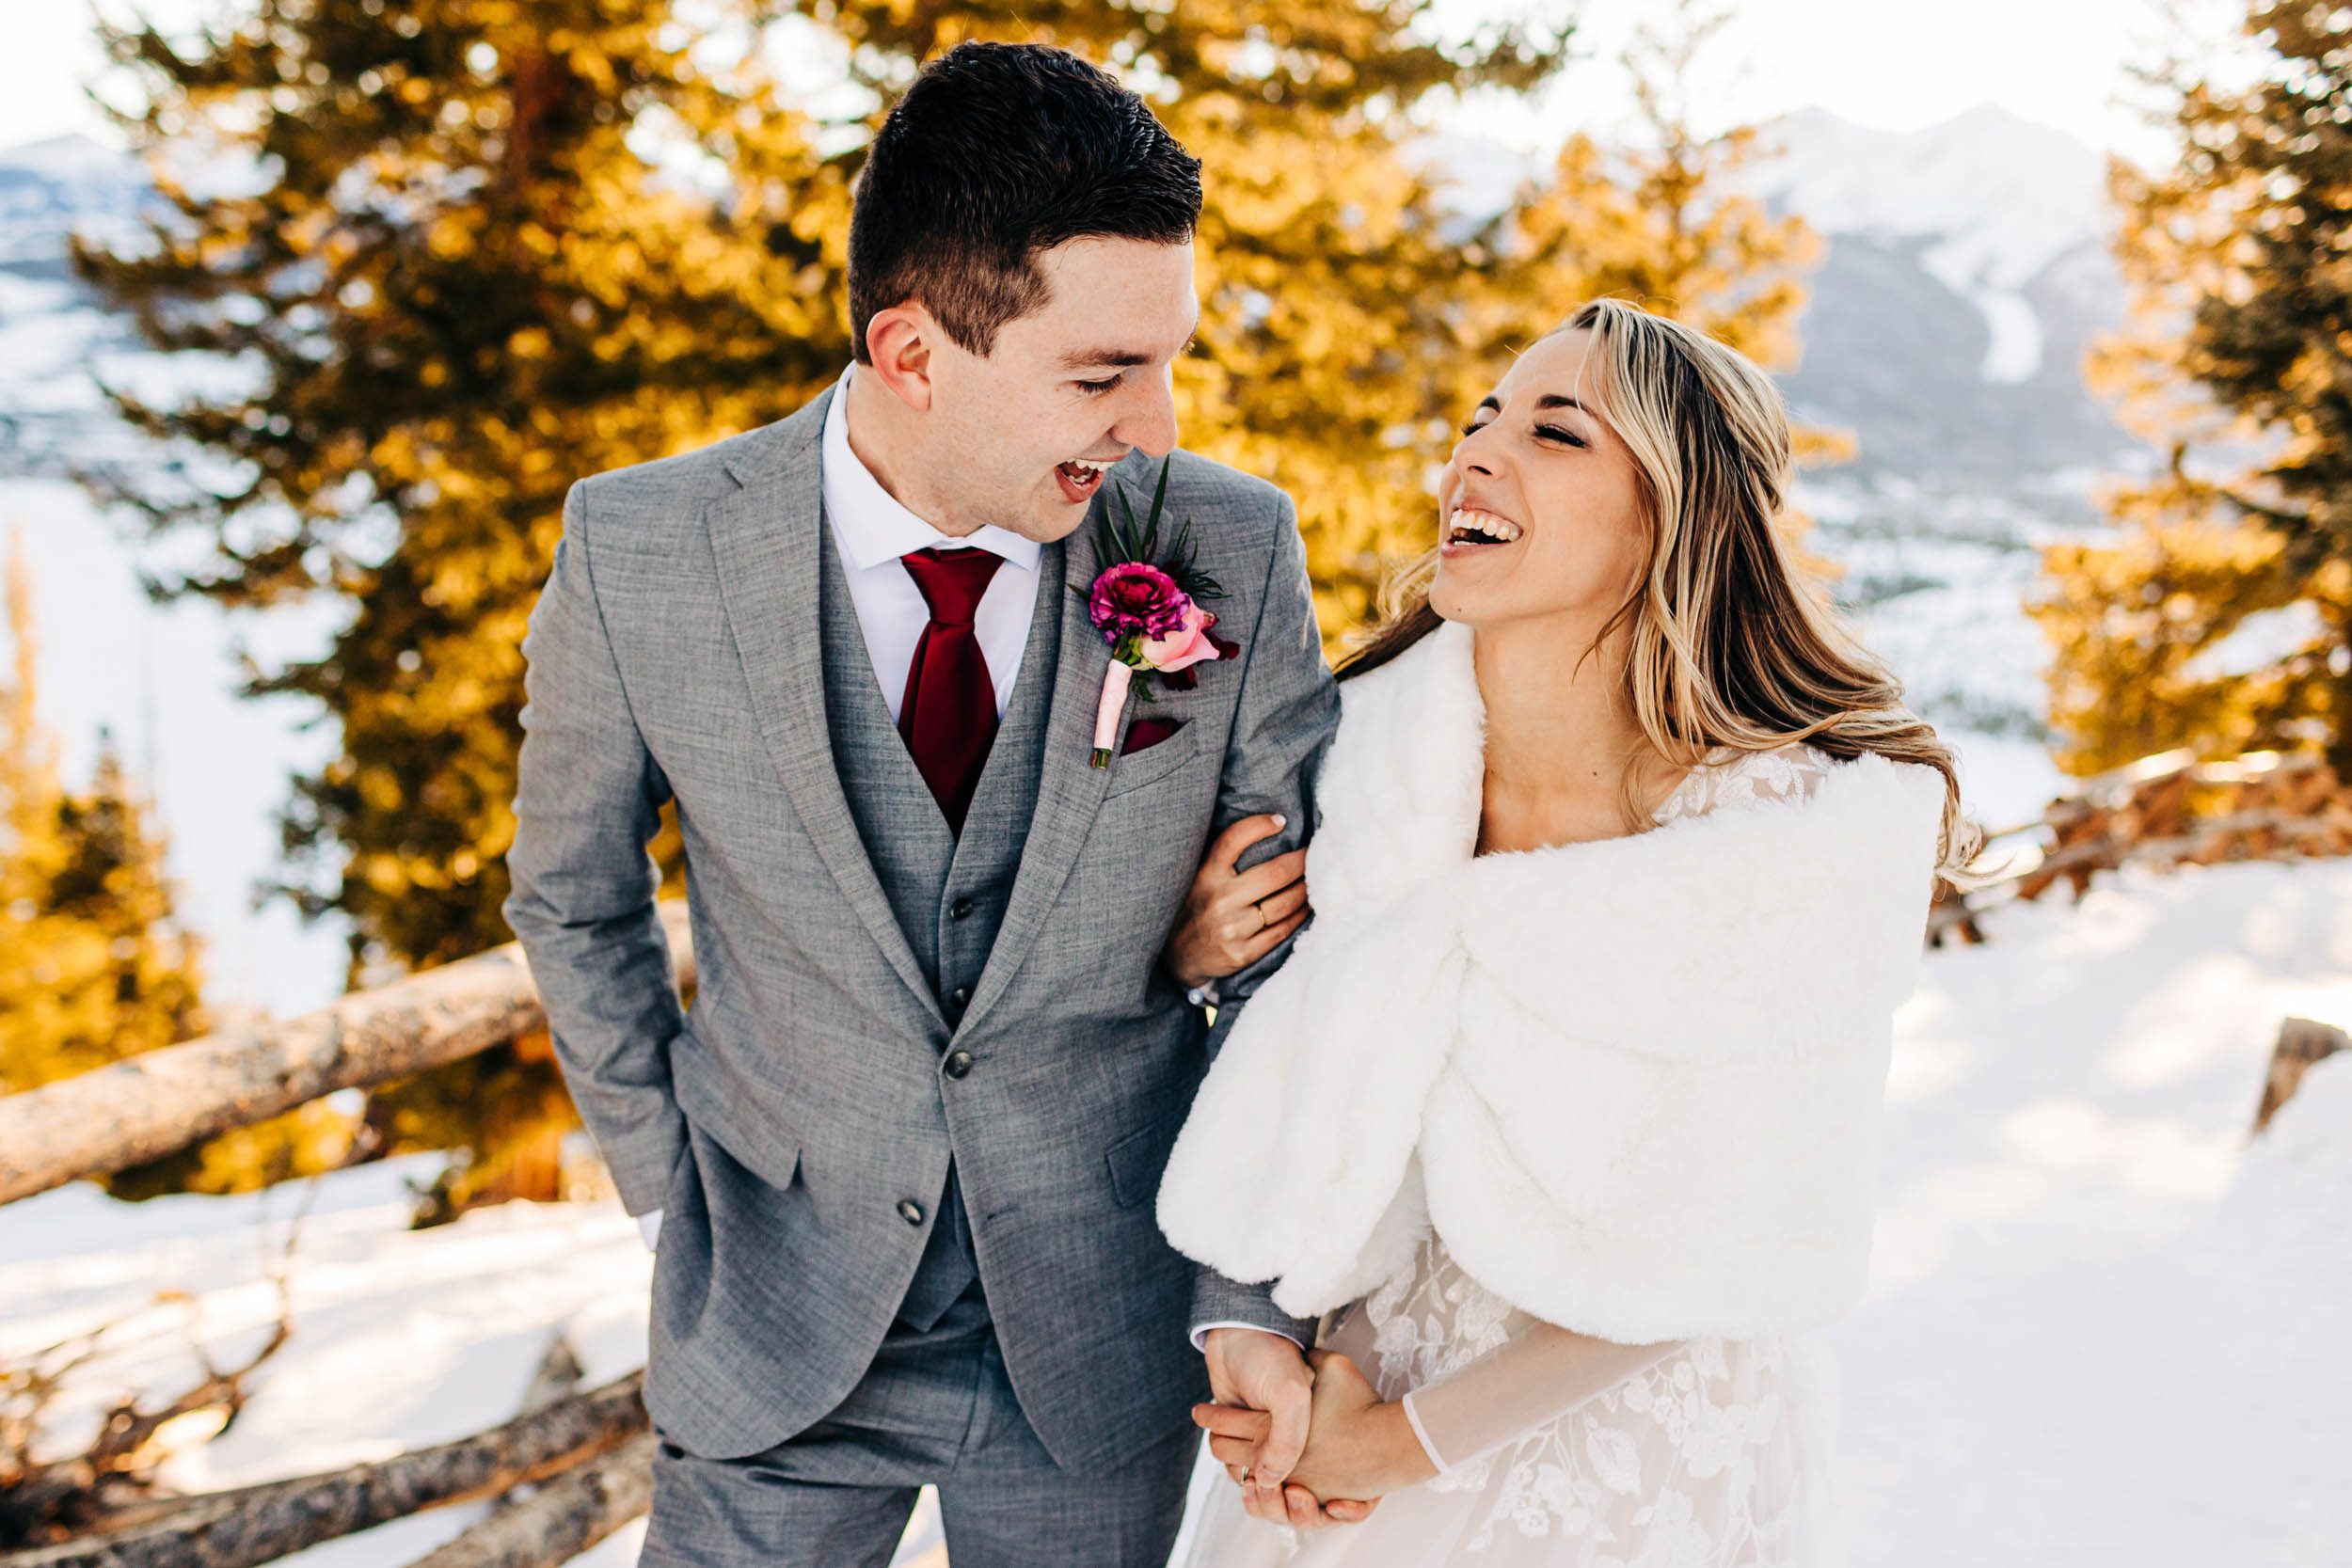 candid wedding photo taken at sapphire point in Dillon colorado